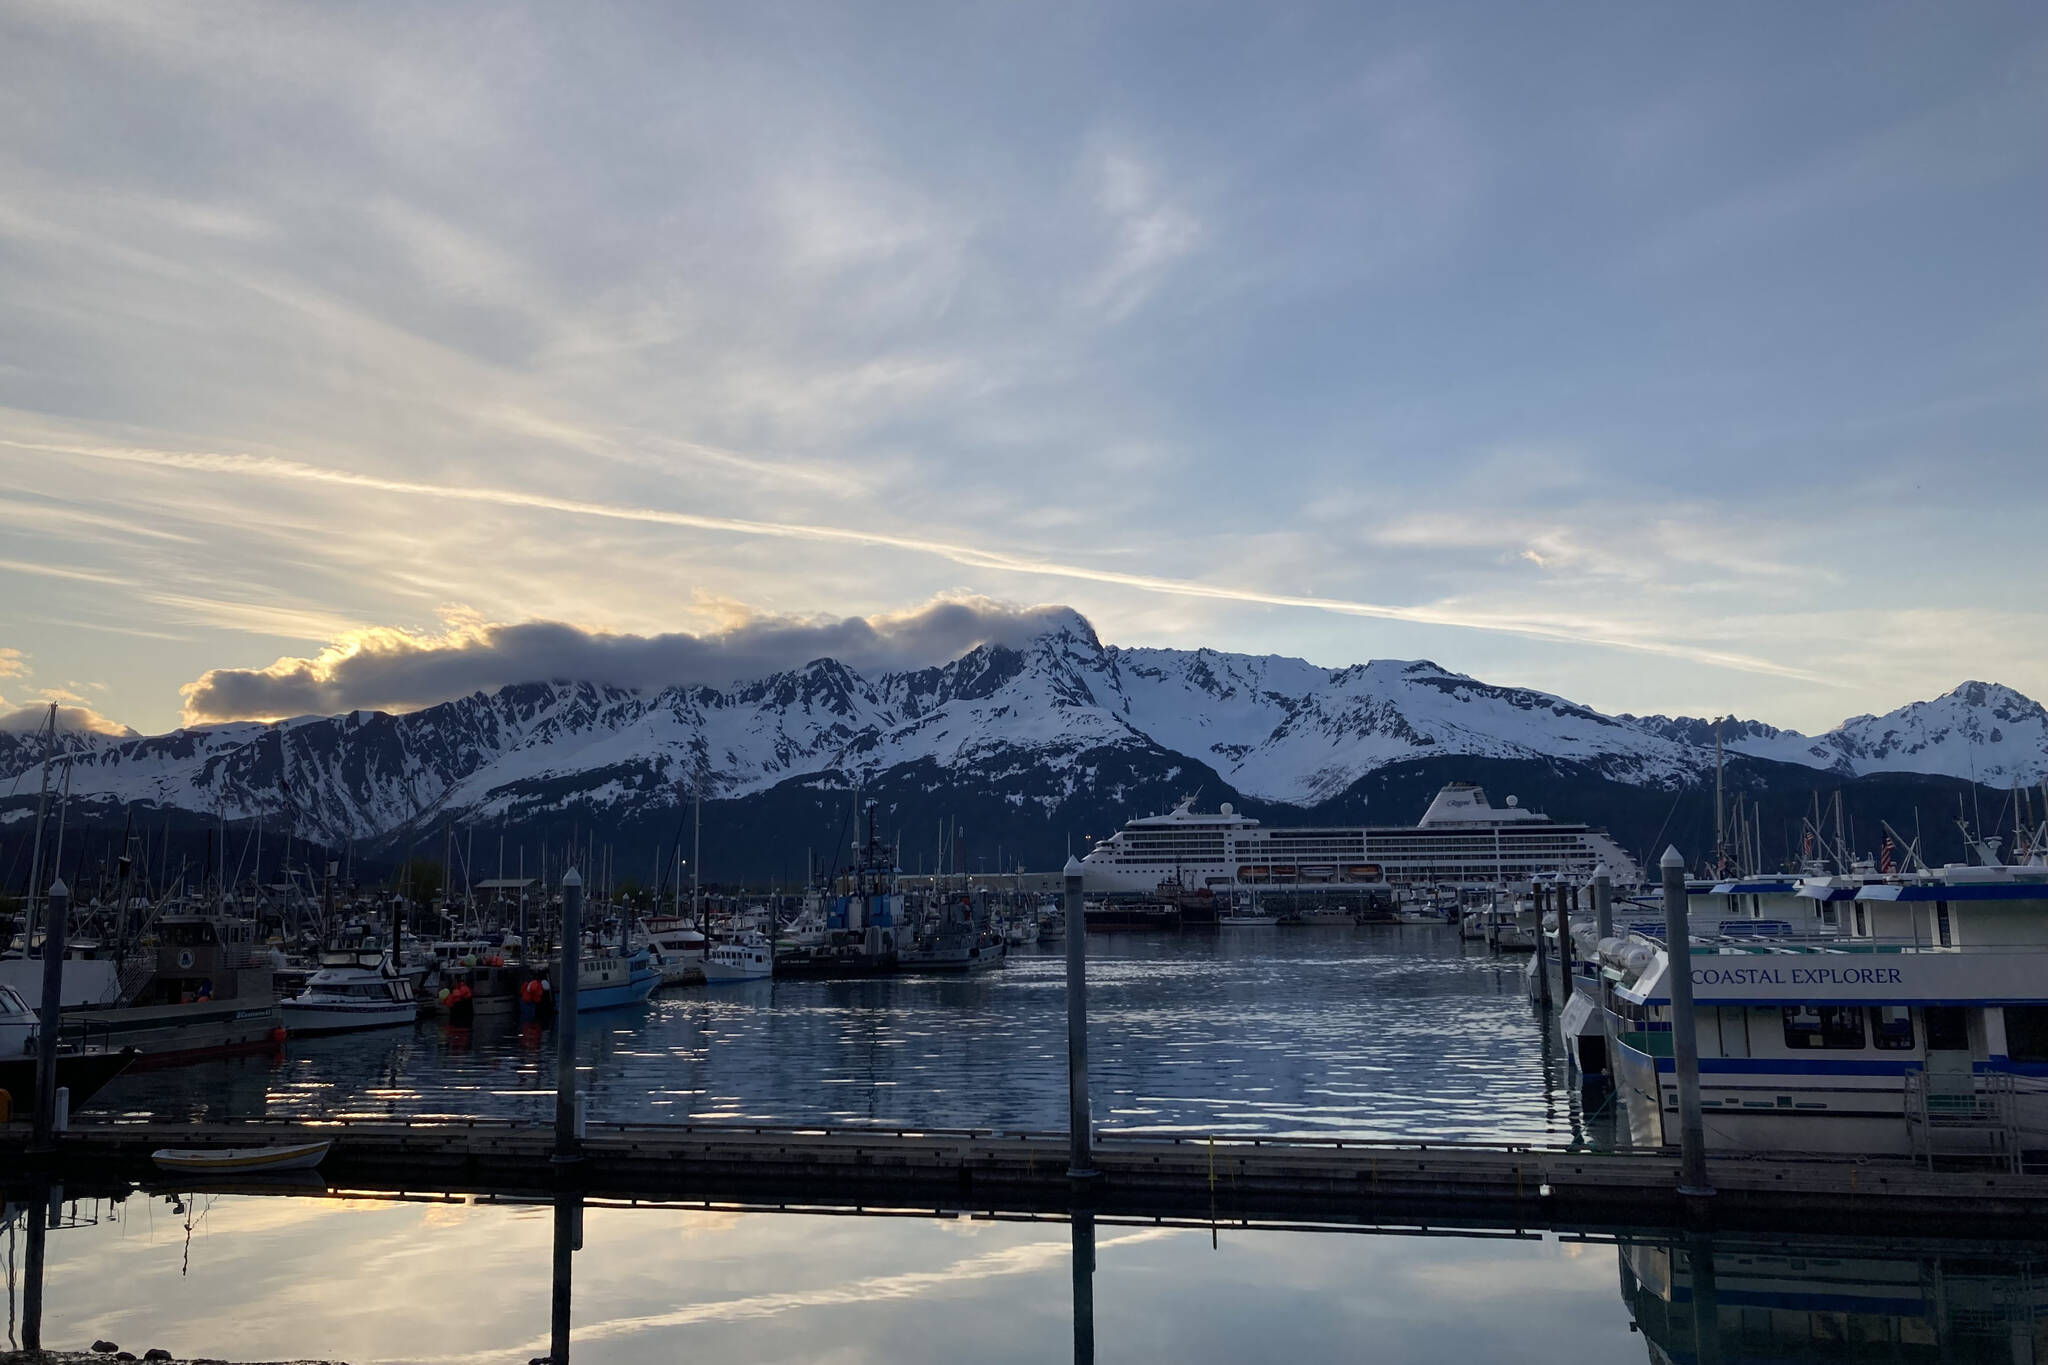 A cruise ship is docked in Seward, Alaska, on Wednesday, May 25, 2022. (Camille Botello/Peninsula Clarion)